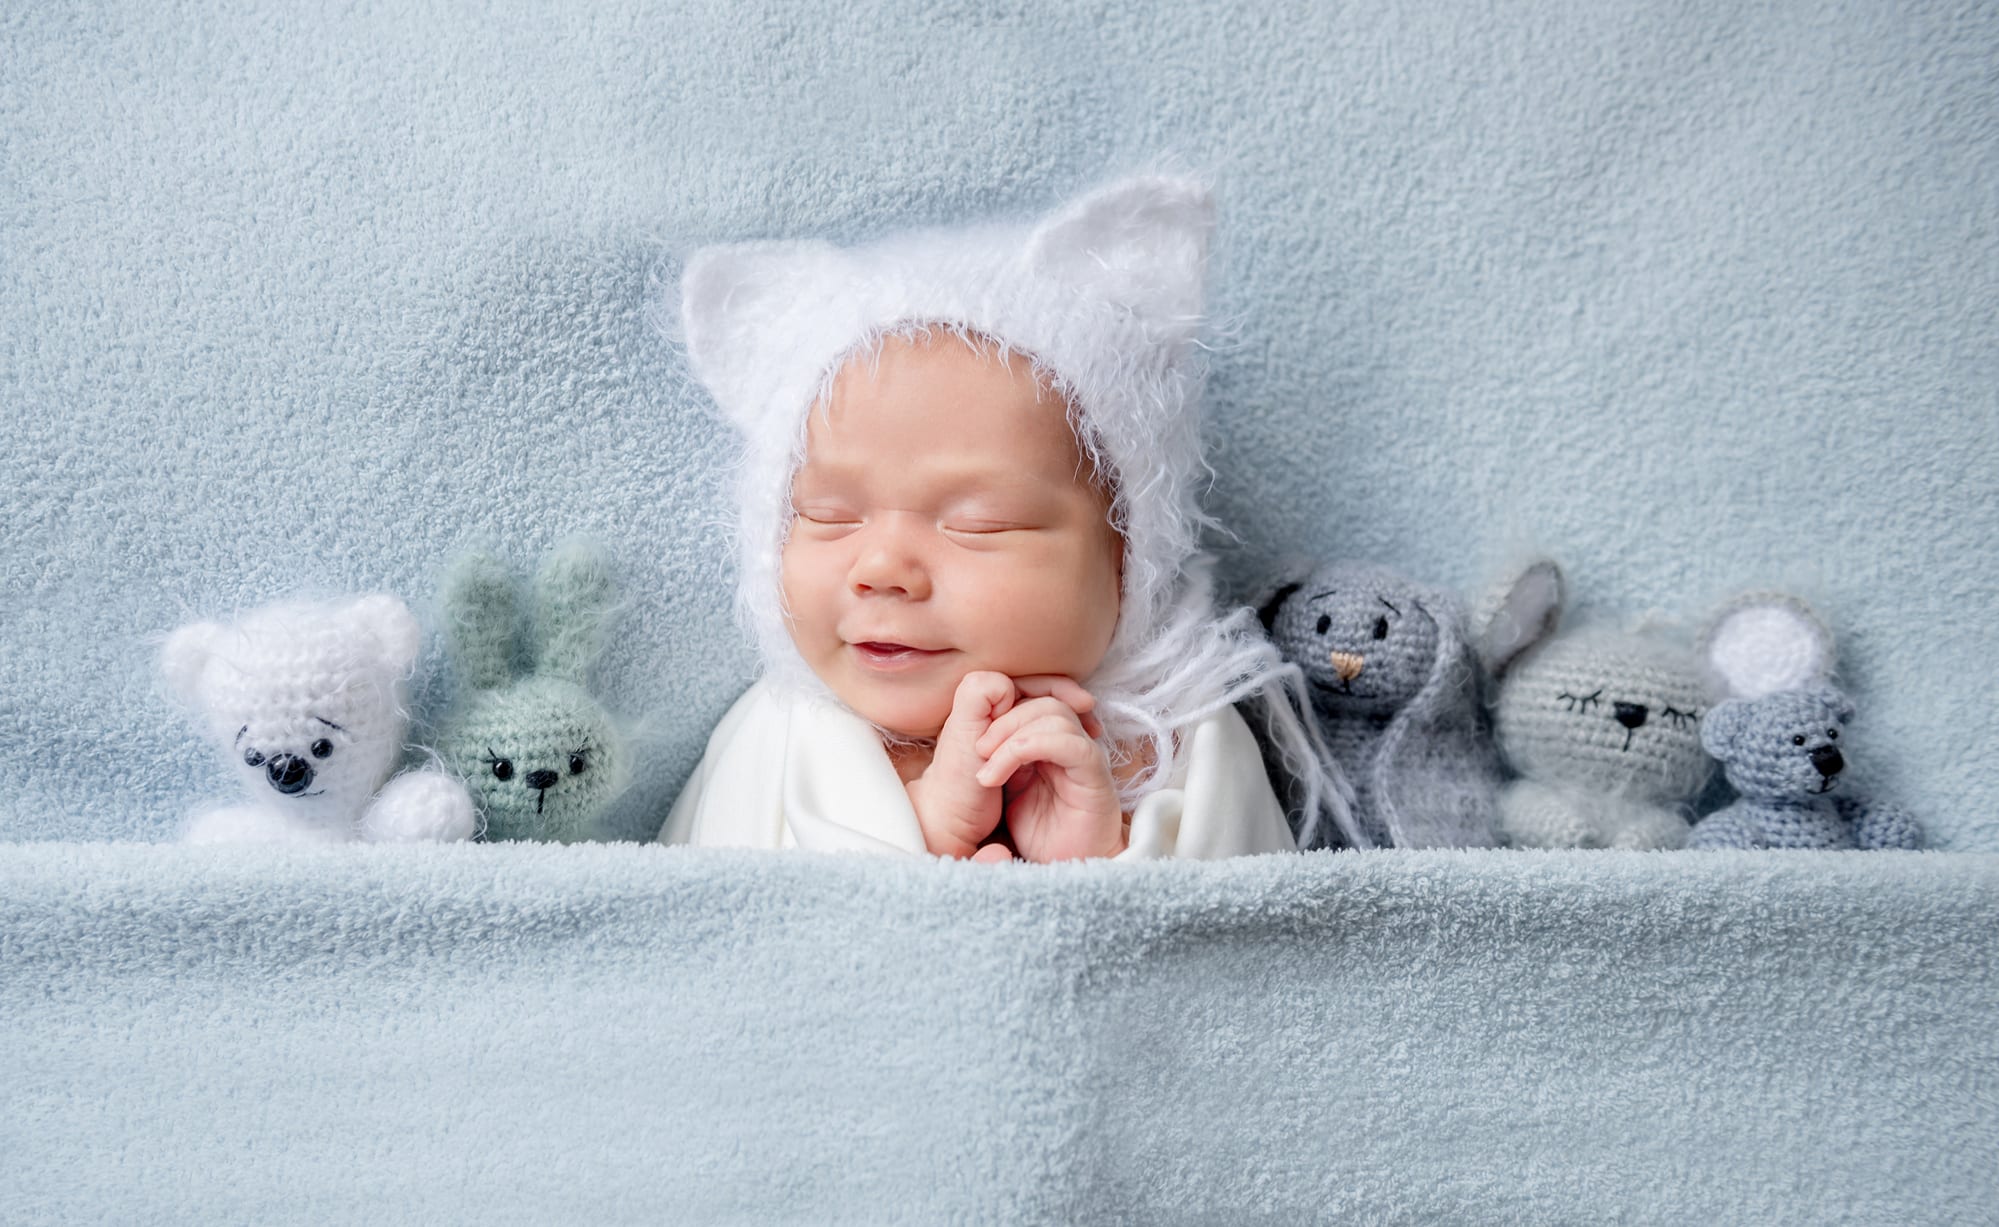 9 proven ways to get your baby to sleep better